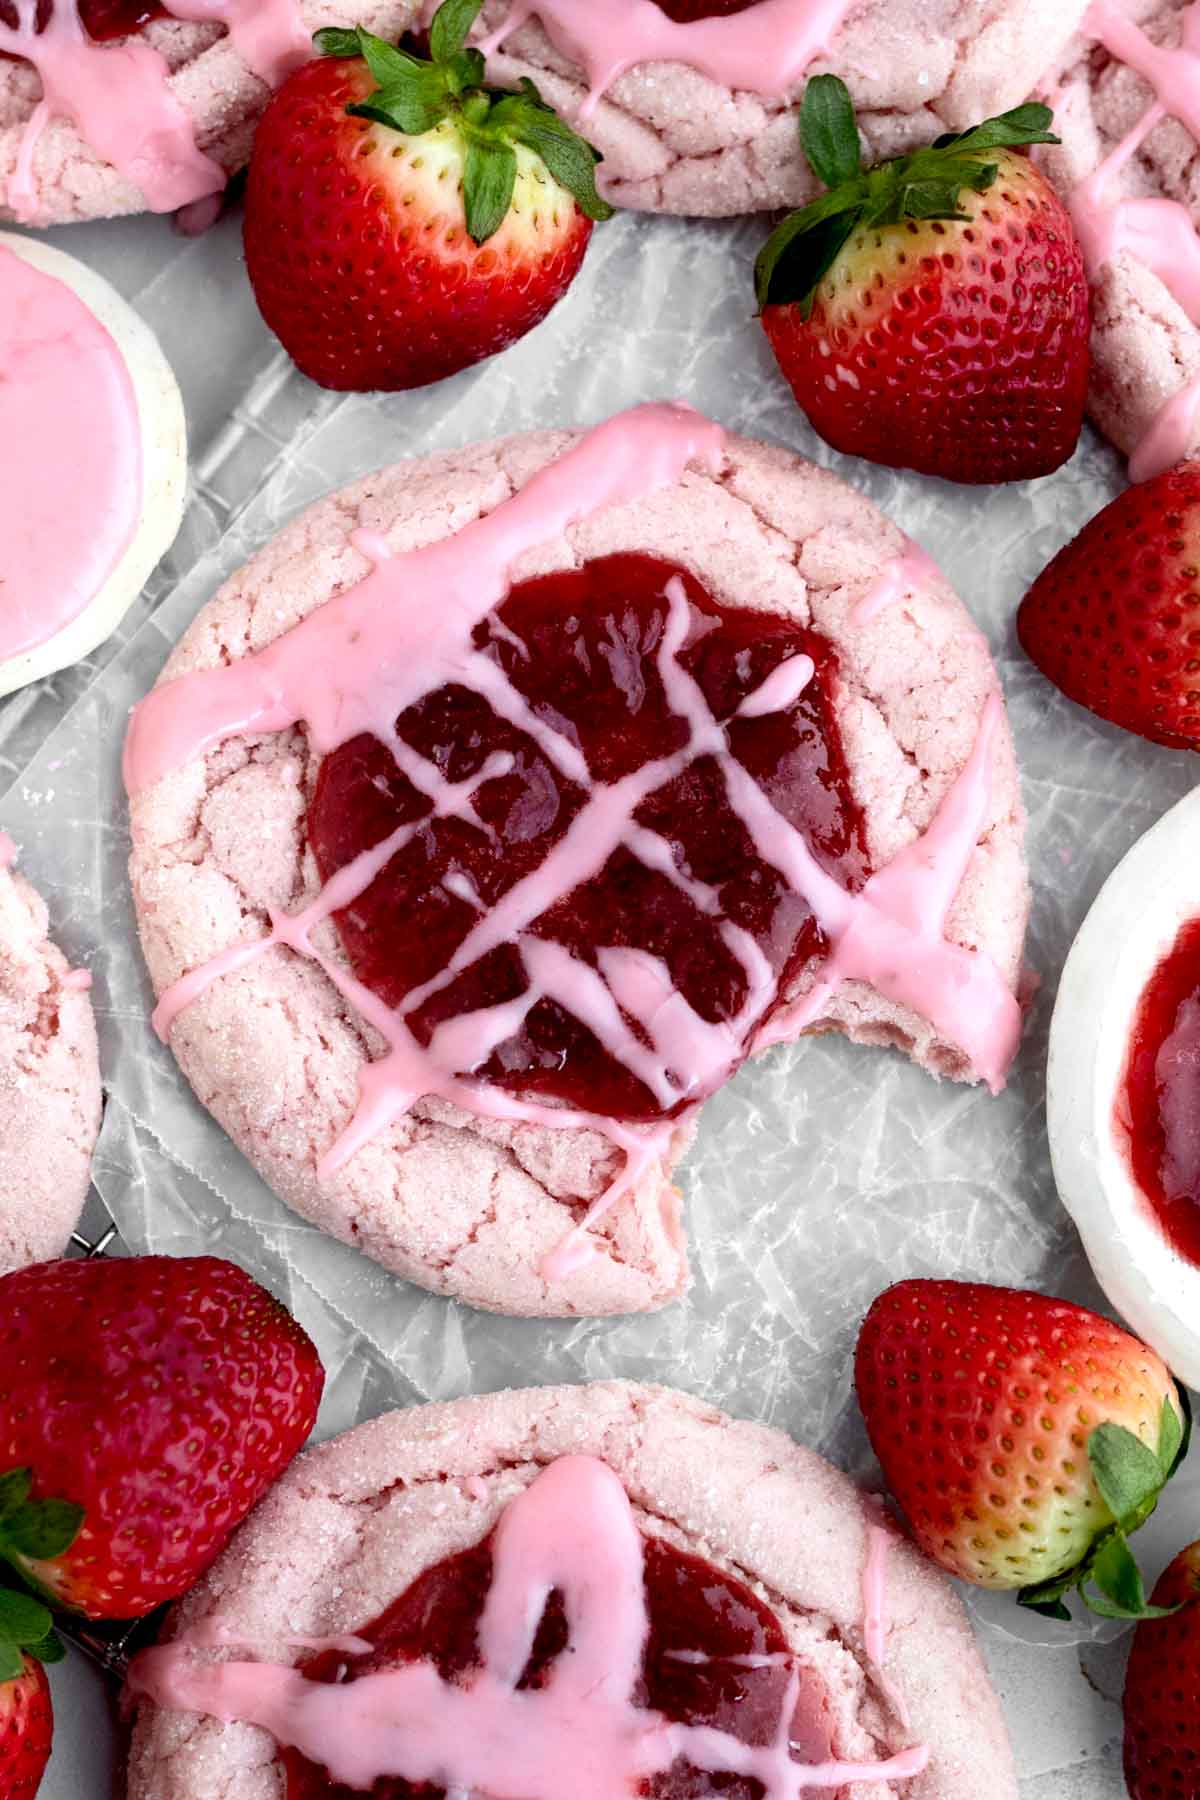 A teasing bite of strawberry bliss is taken from this gluten free Strawberry Jam Cookie.